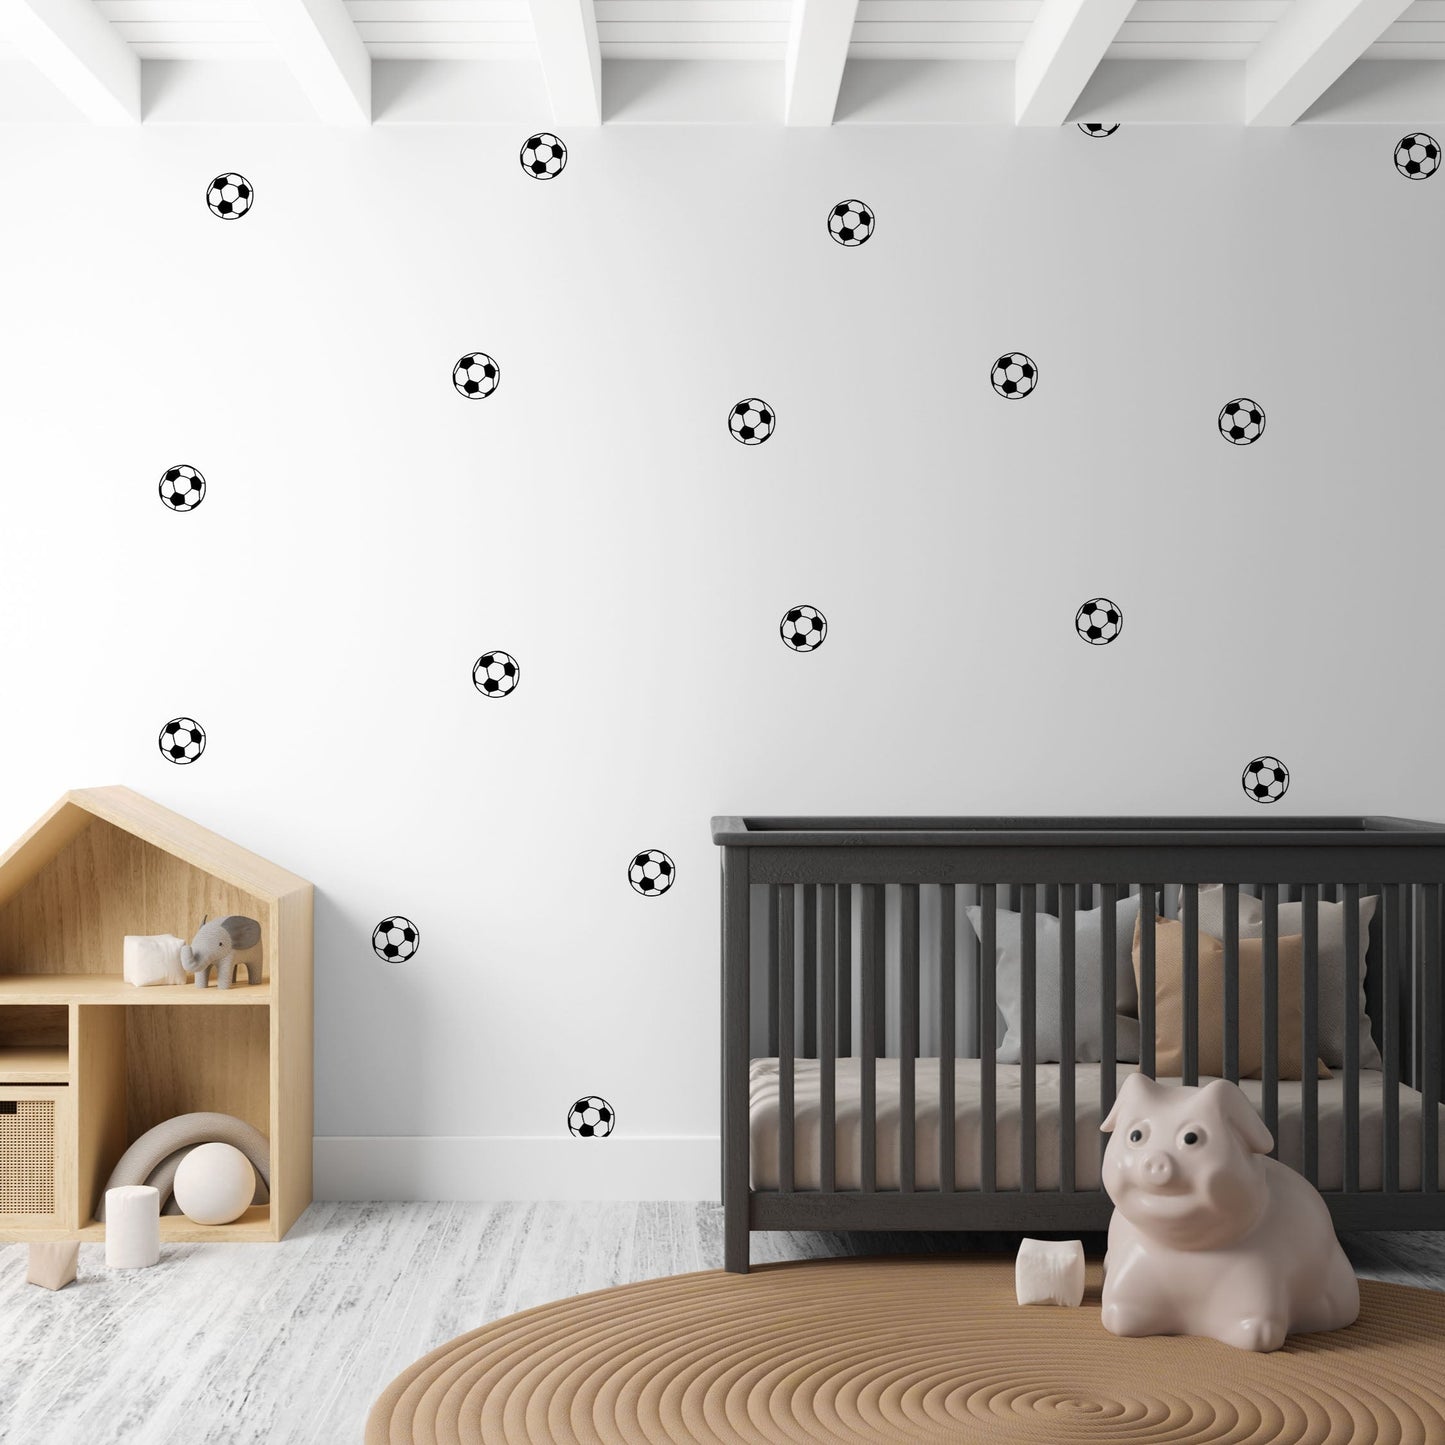 White Football Fabric Wall Stickers by The Little Jones